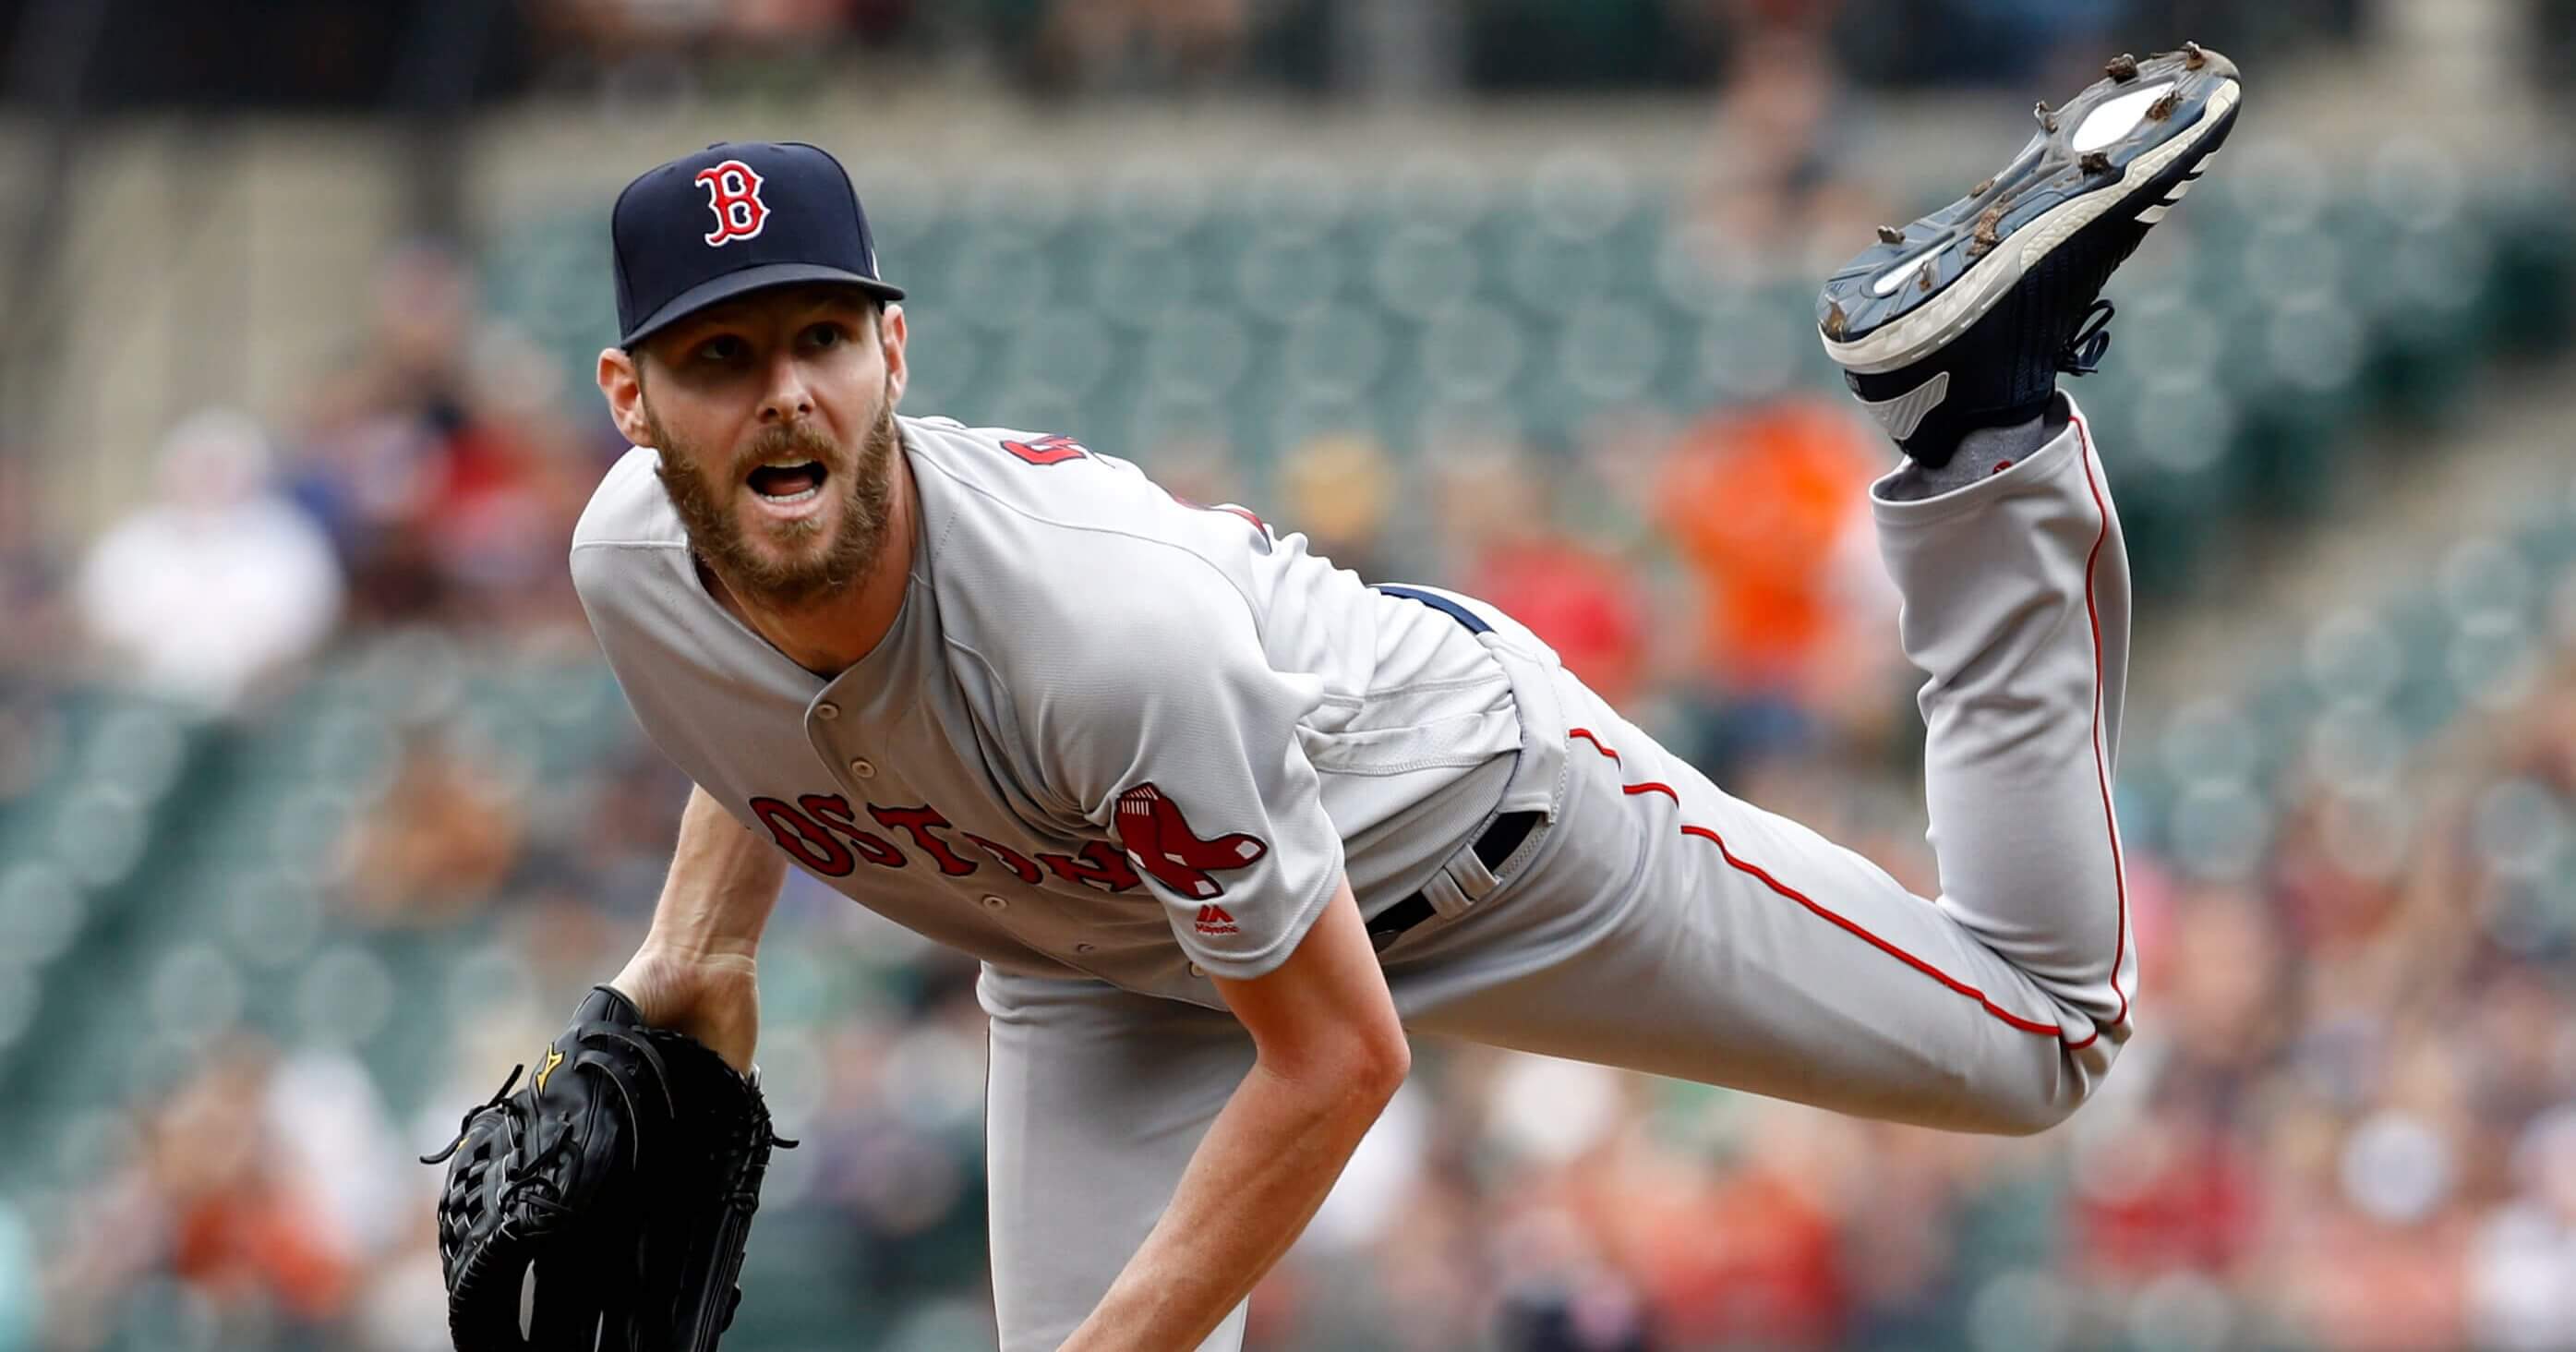 Boston Red Sox starting pitcher Chris Sale follows through on a pitch to the Baltimore Orioles in the first inning of a baseball game Sunday at Camden Yards.